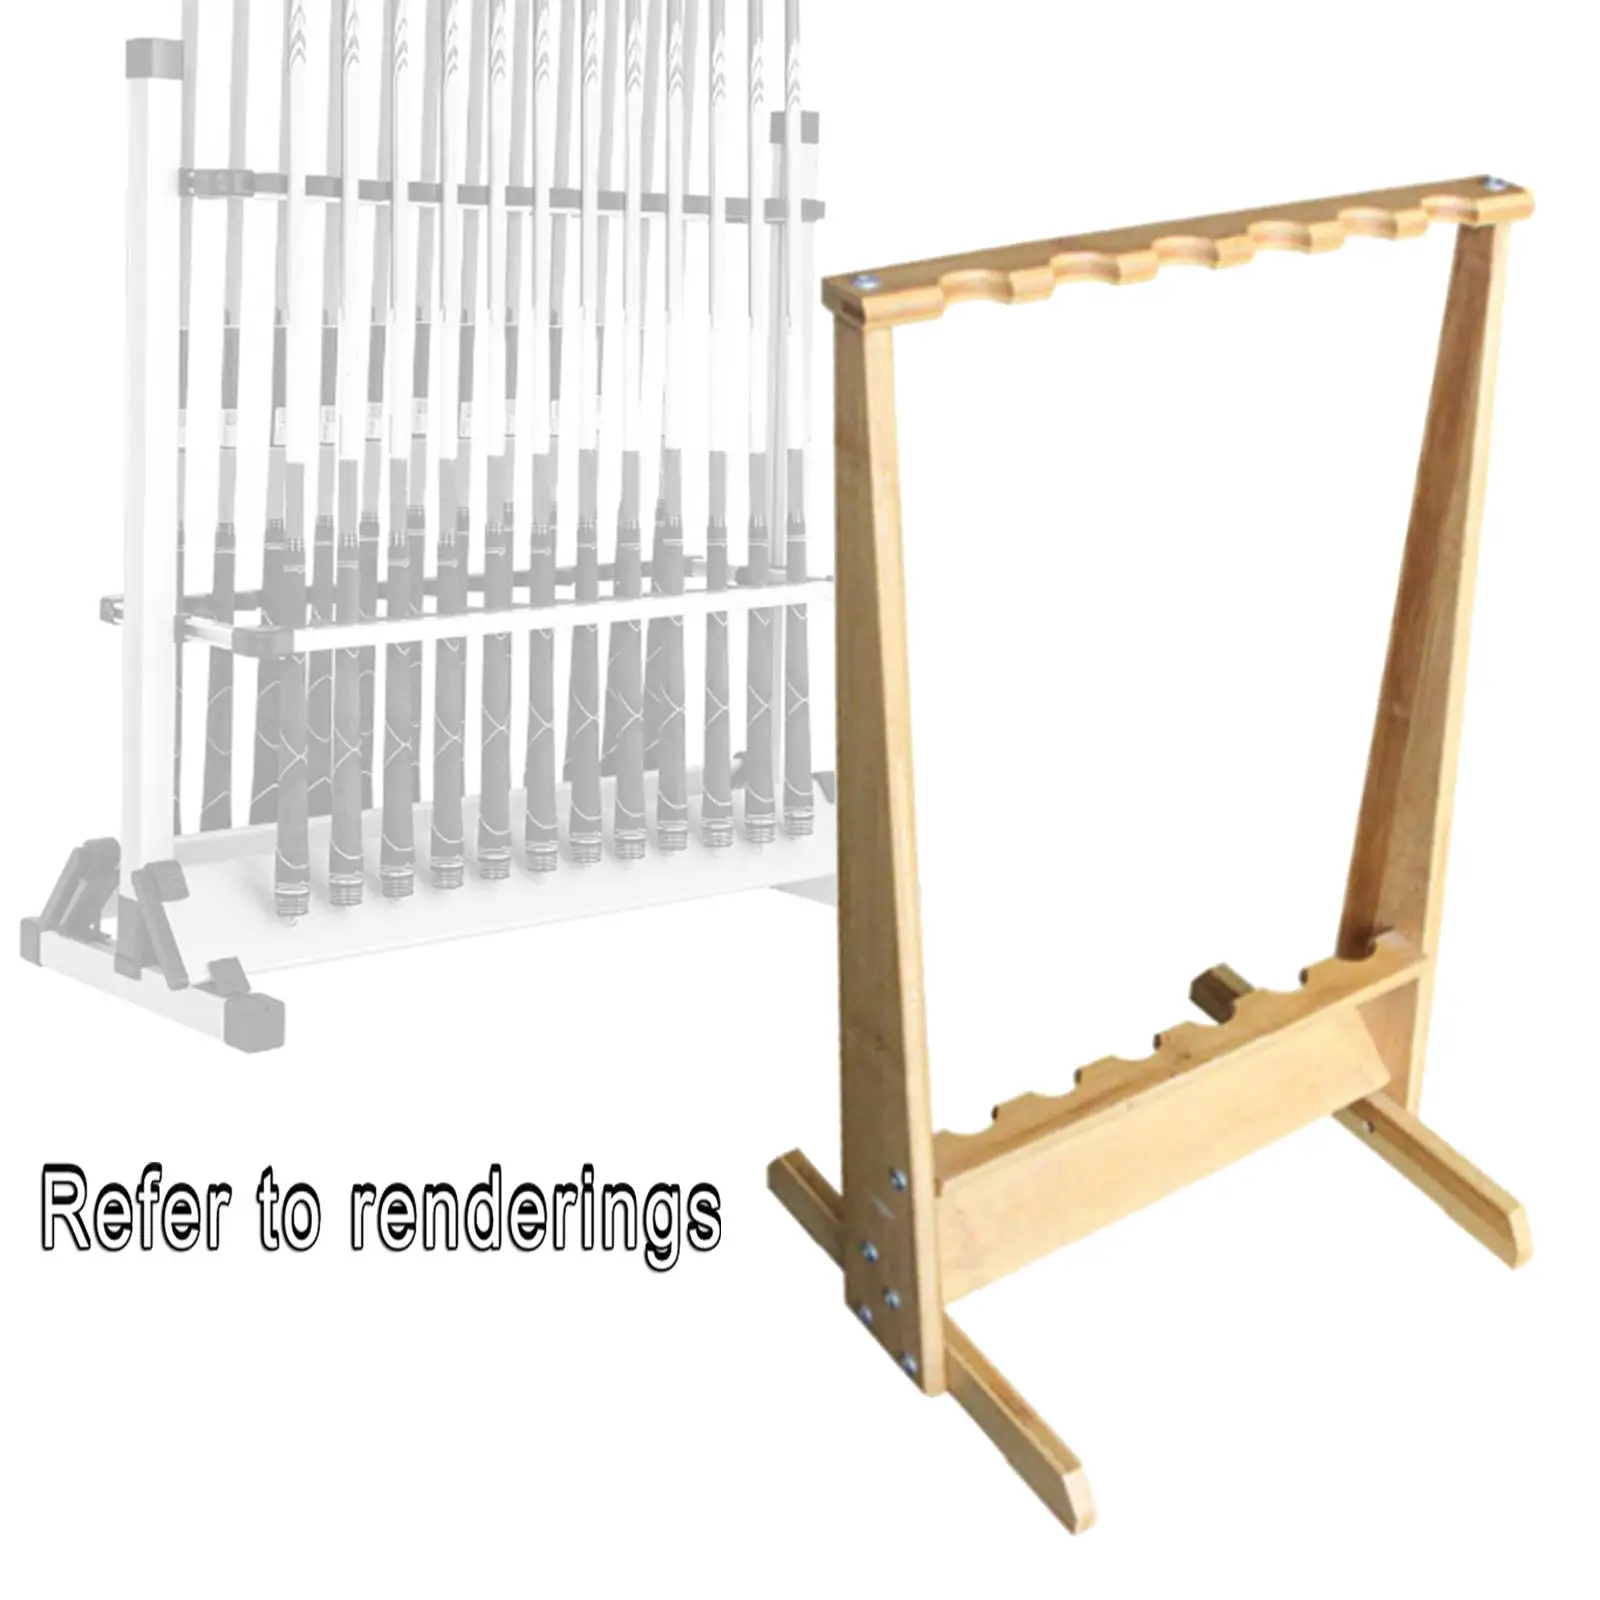 Bamboo 6 Fishing Rod Rack Vertical Portable Holds up to 6 Fishing Rods Fishing Pole Holder Organizer Floor Stand for Boat Home